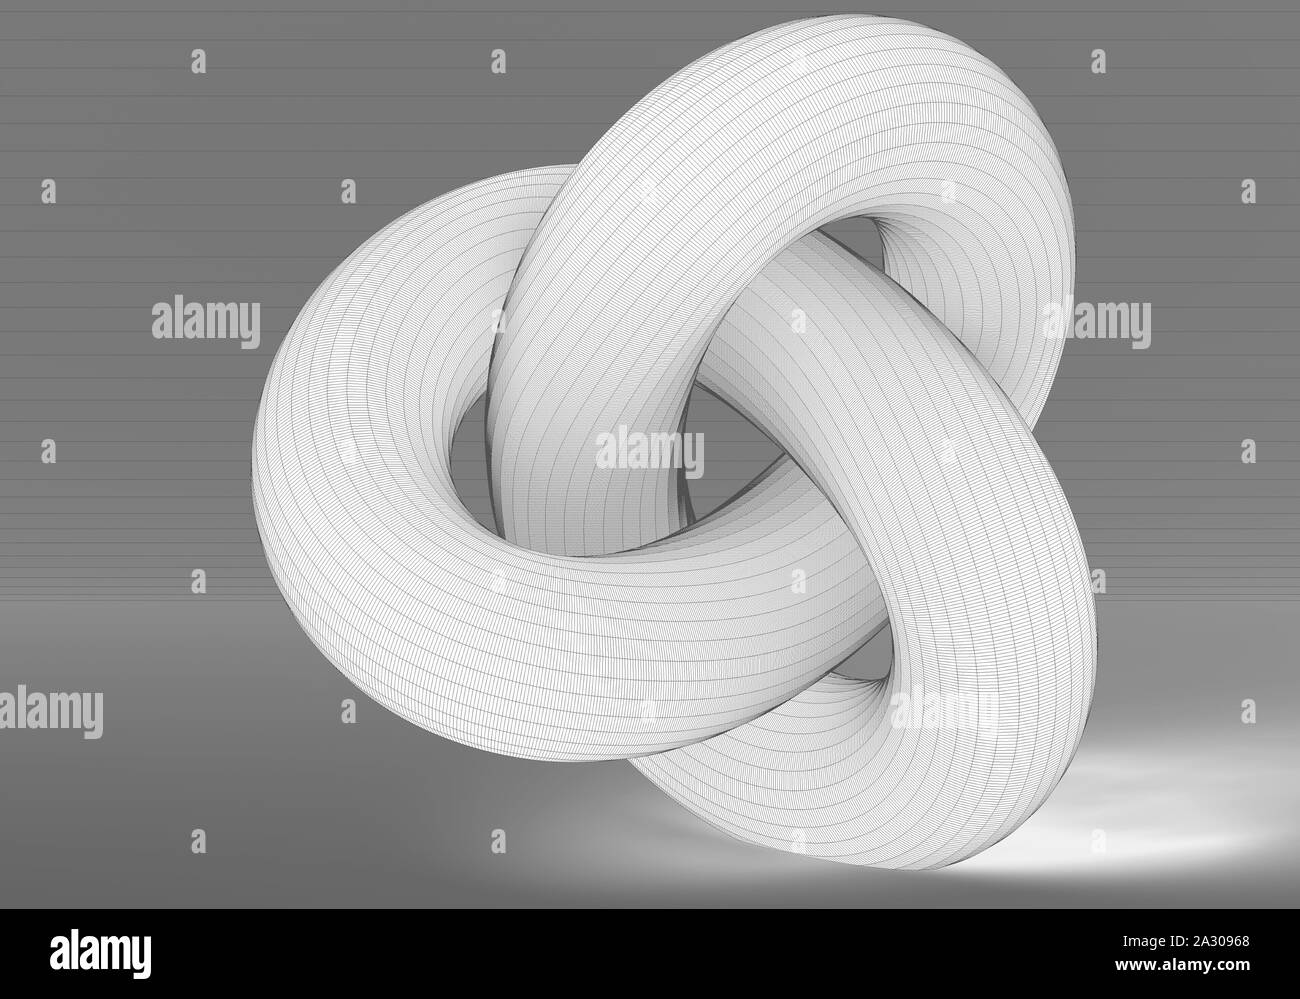 White torus knot with black wire-frame lines, geometrical representation of parametric surface over gray background. 3d rendering illustration Stock Photo